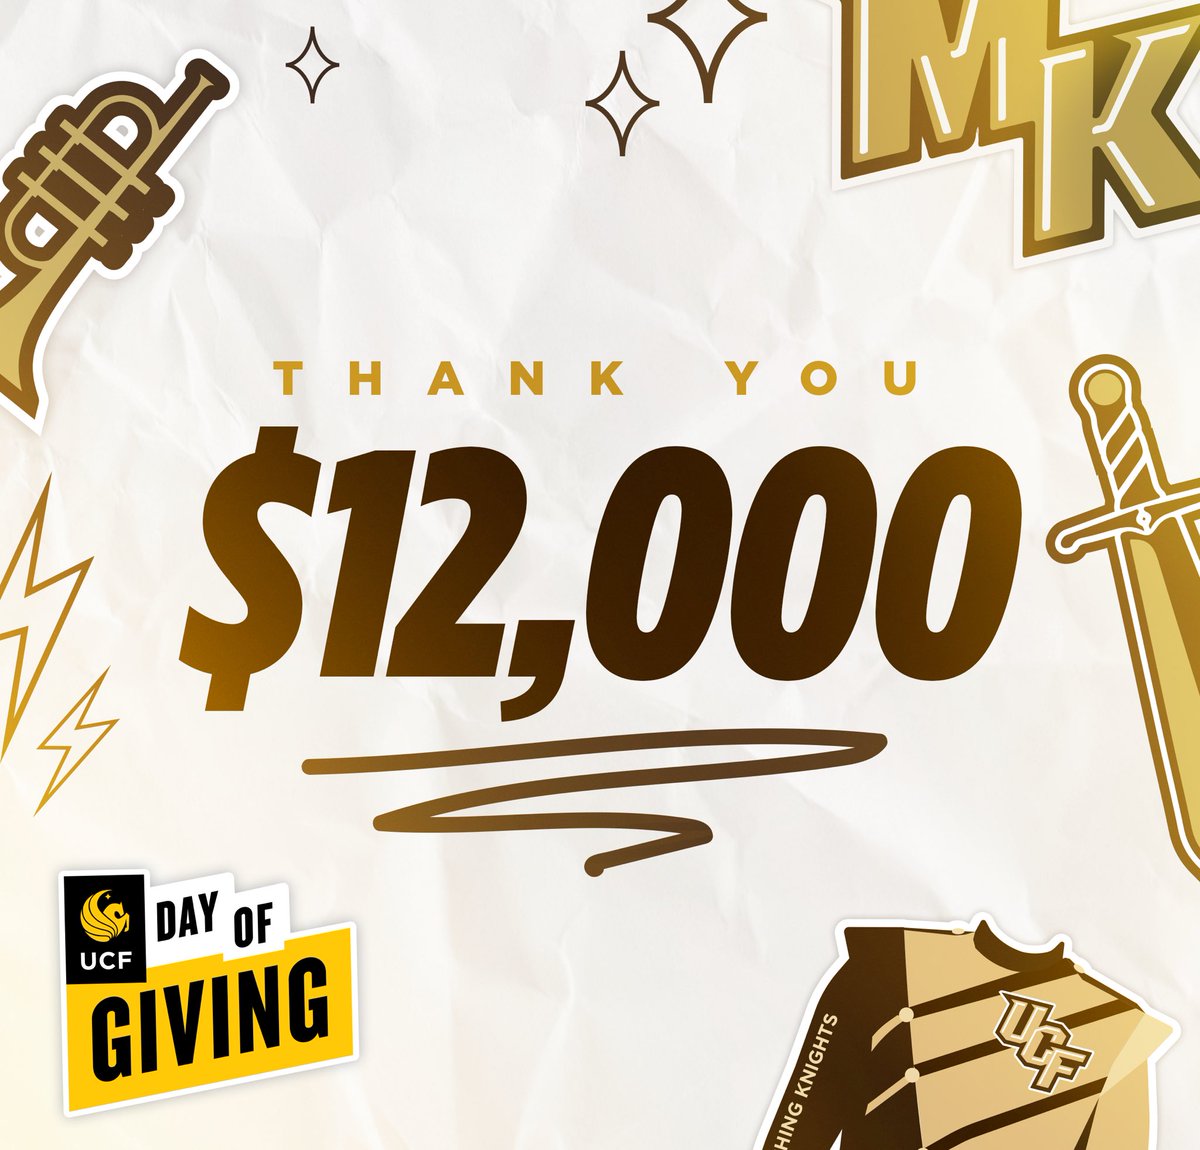 We just hit $12,00 in donations‼️ Thank you to all of our donors on this #UCFDayofGiving💛